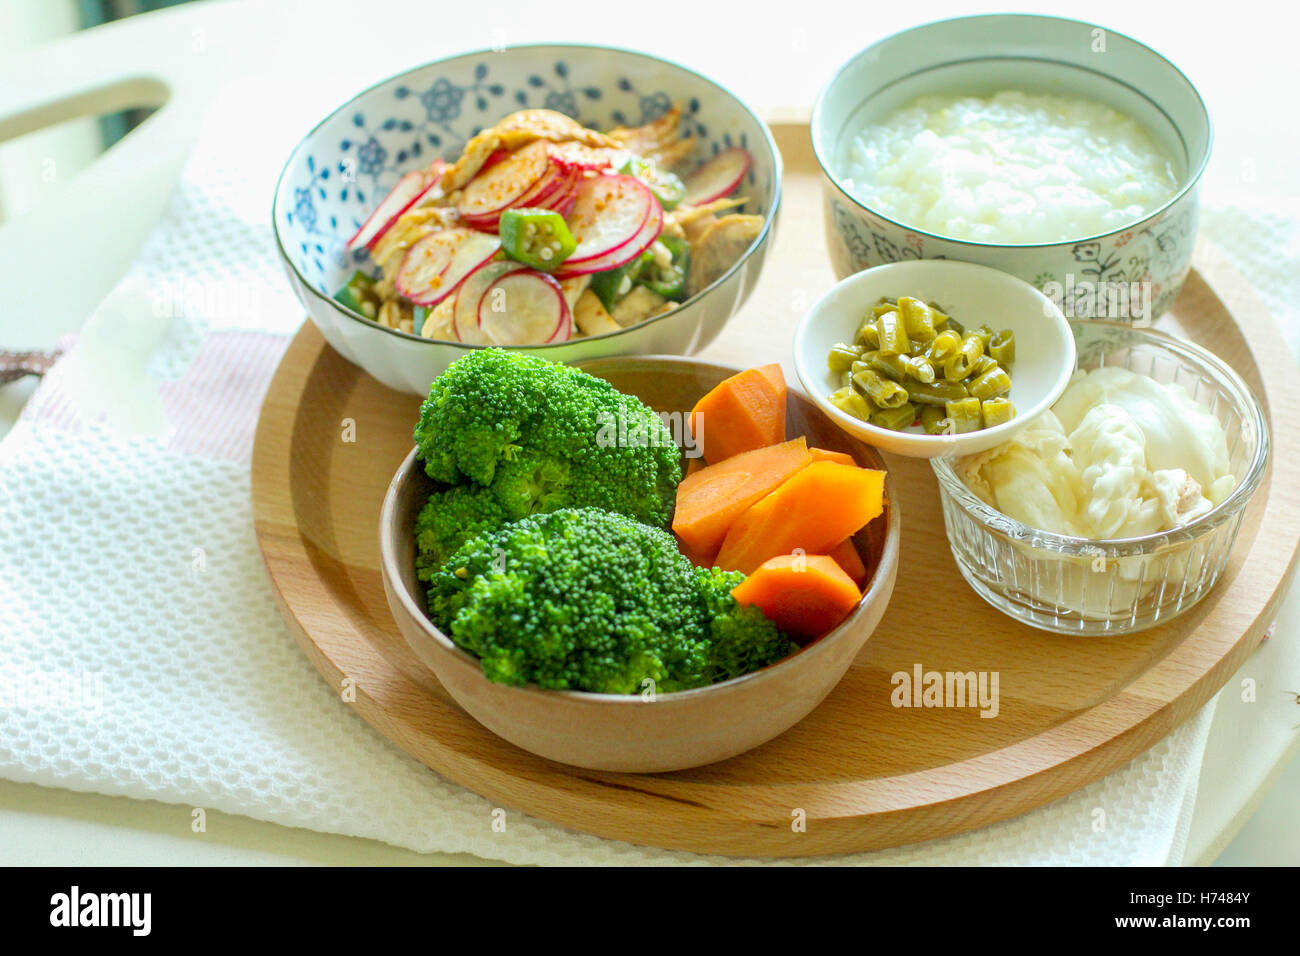 Healthy meal with broccoli, potato and congee Stock Photo